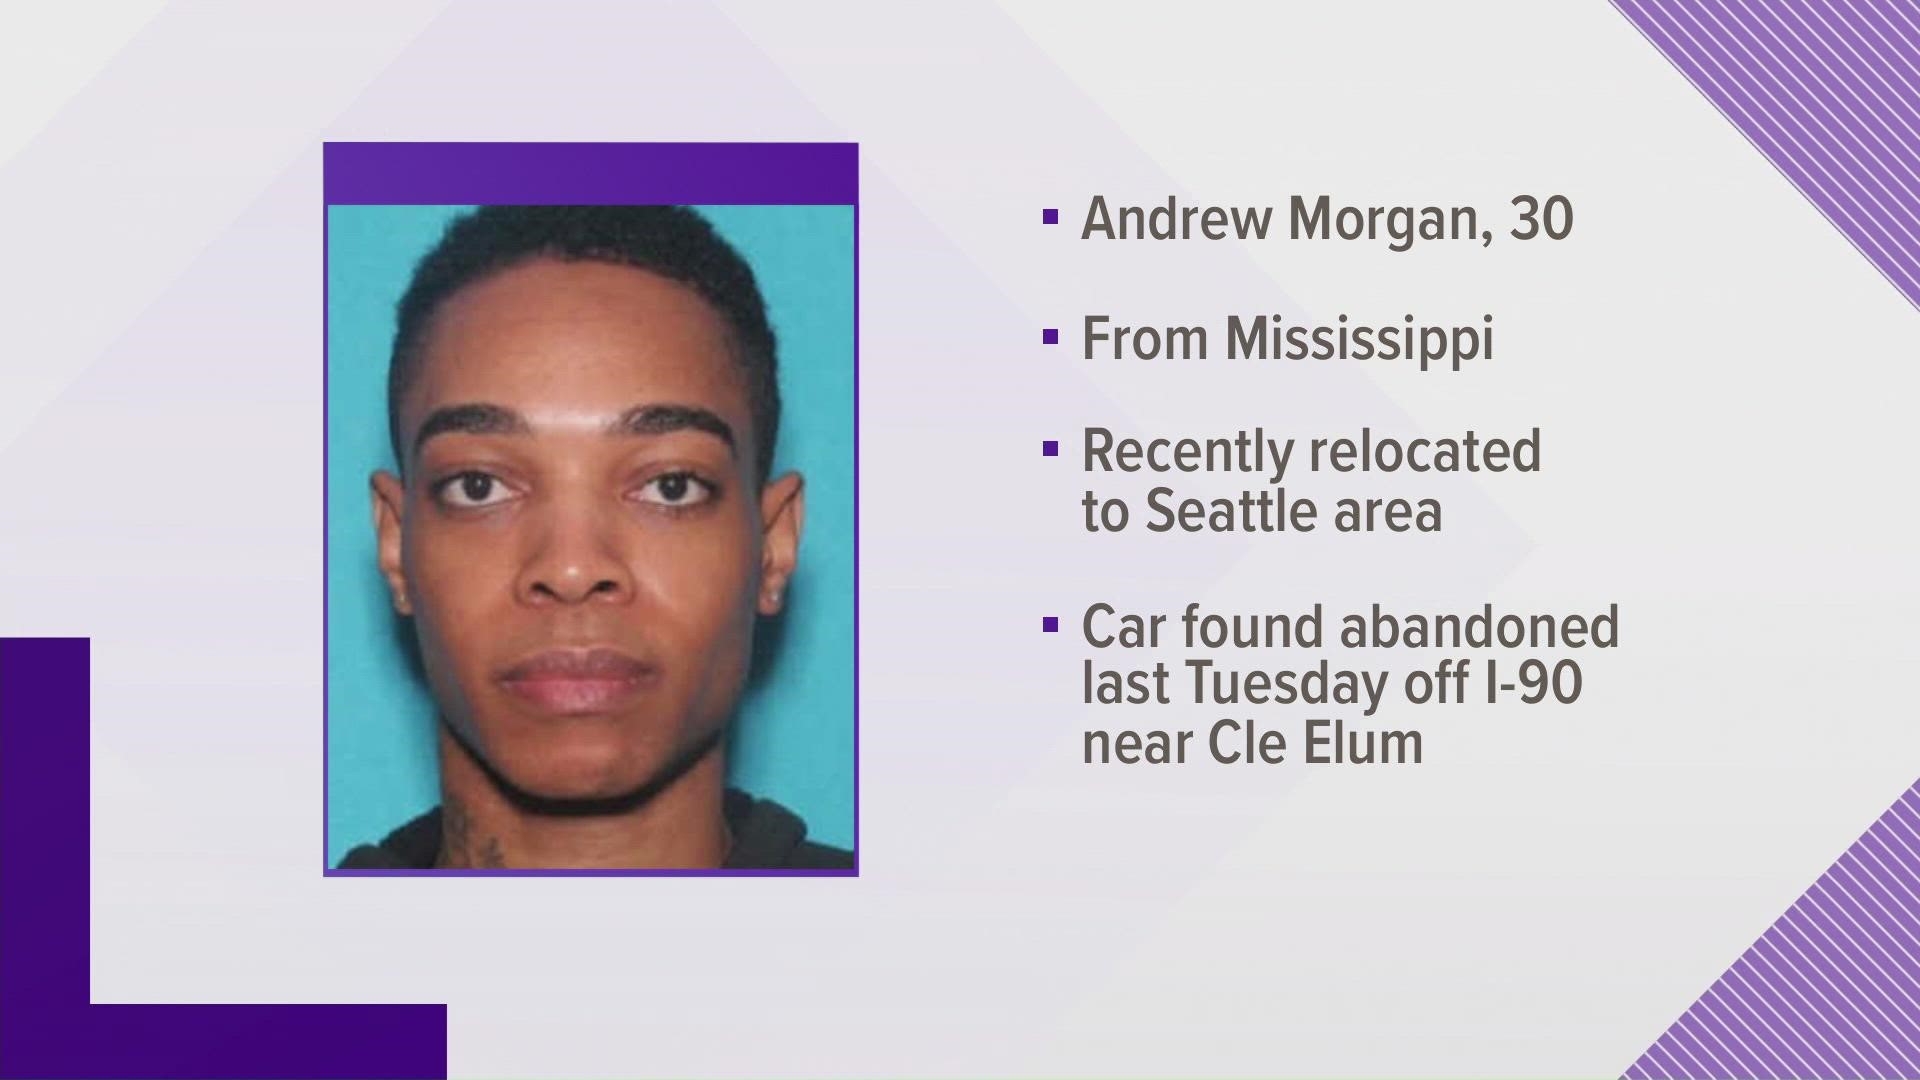 Andrew Morgan of Mississippi was reported missing after detectives believe he abandoned his car following a crash on I-90 near Cle Elum.